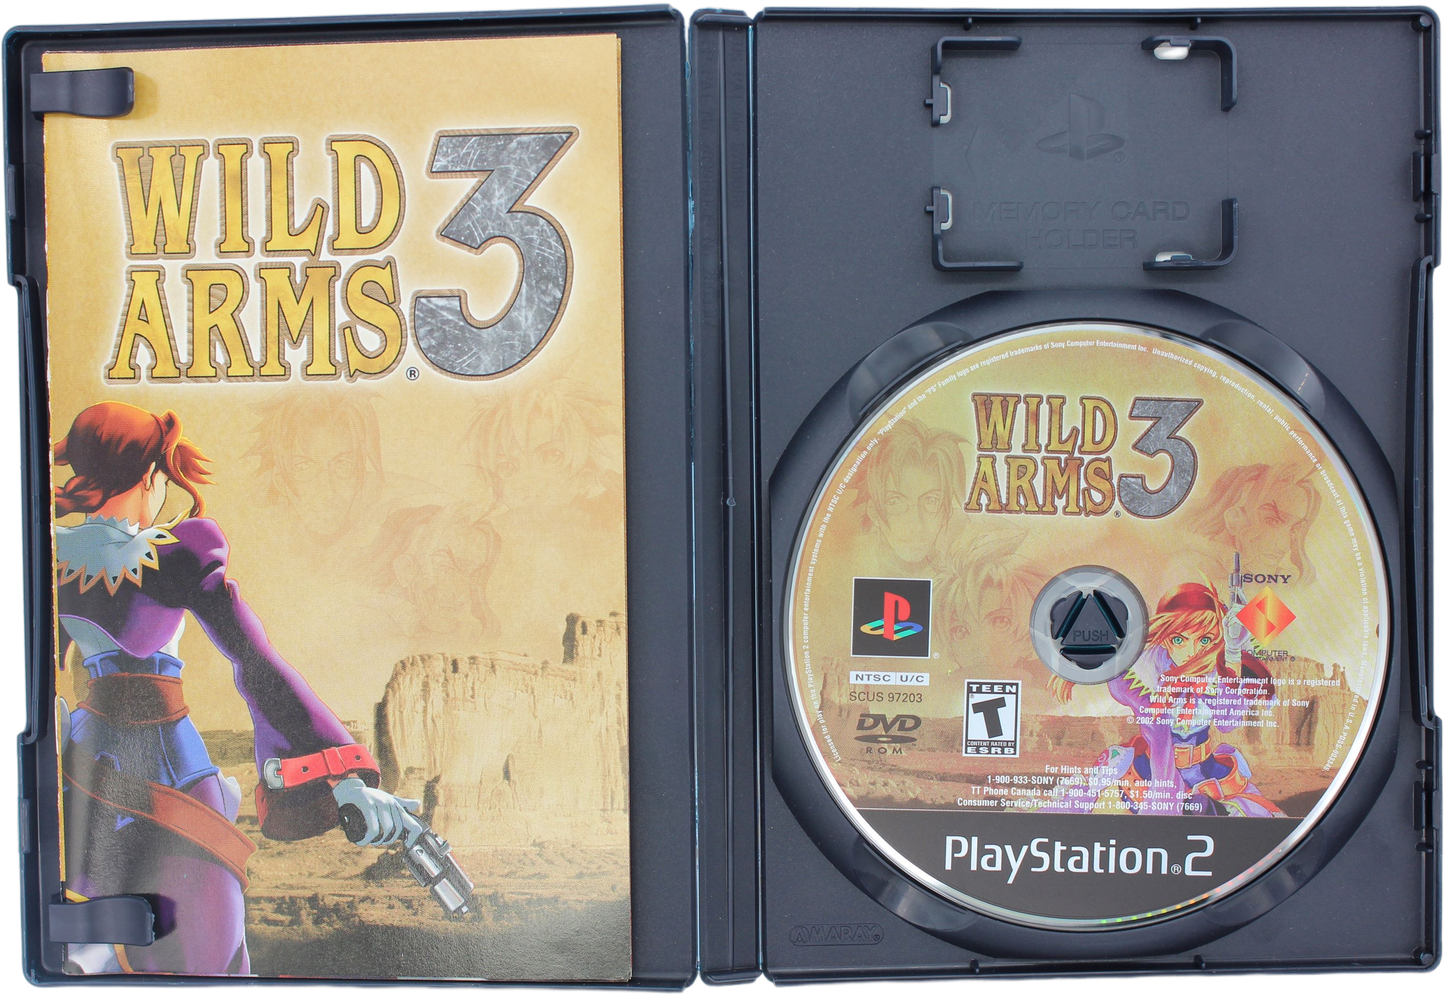 Wild Arms 3 (PS2)